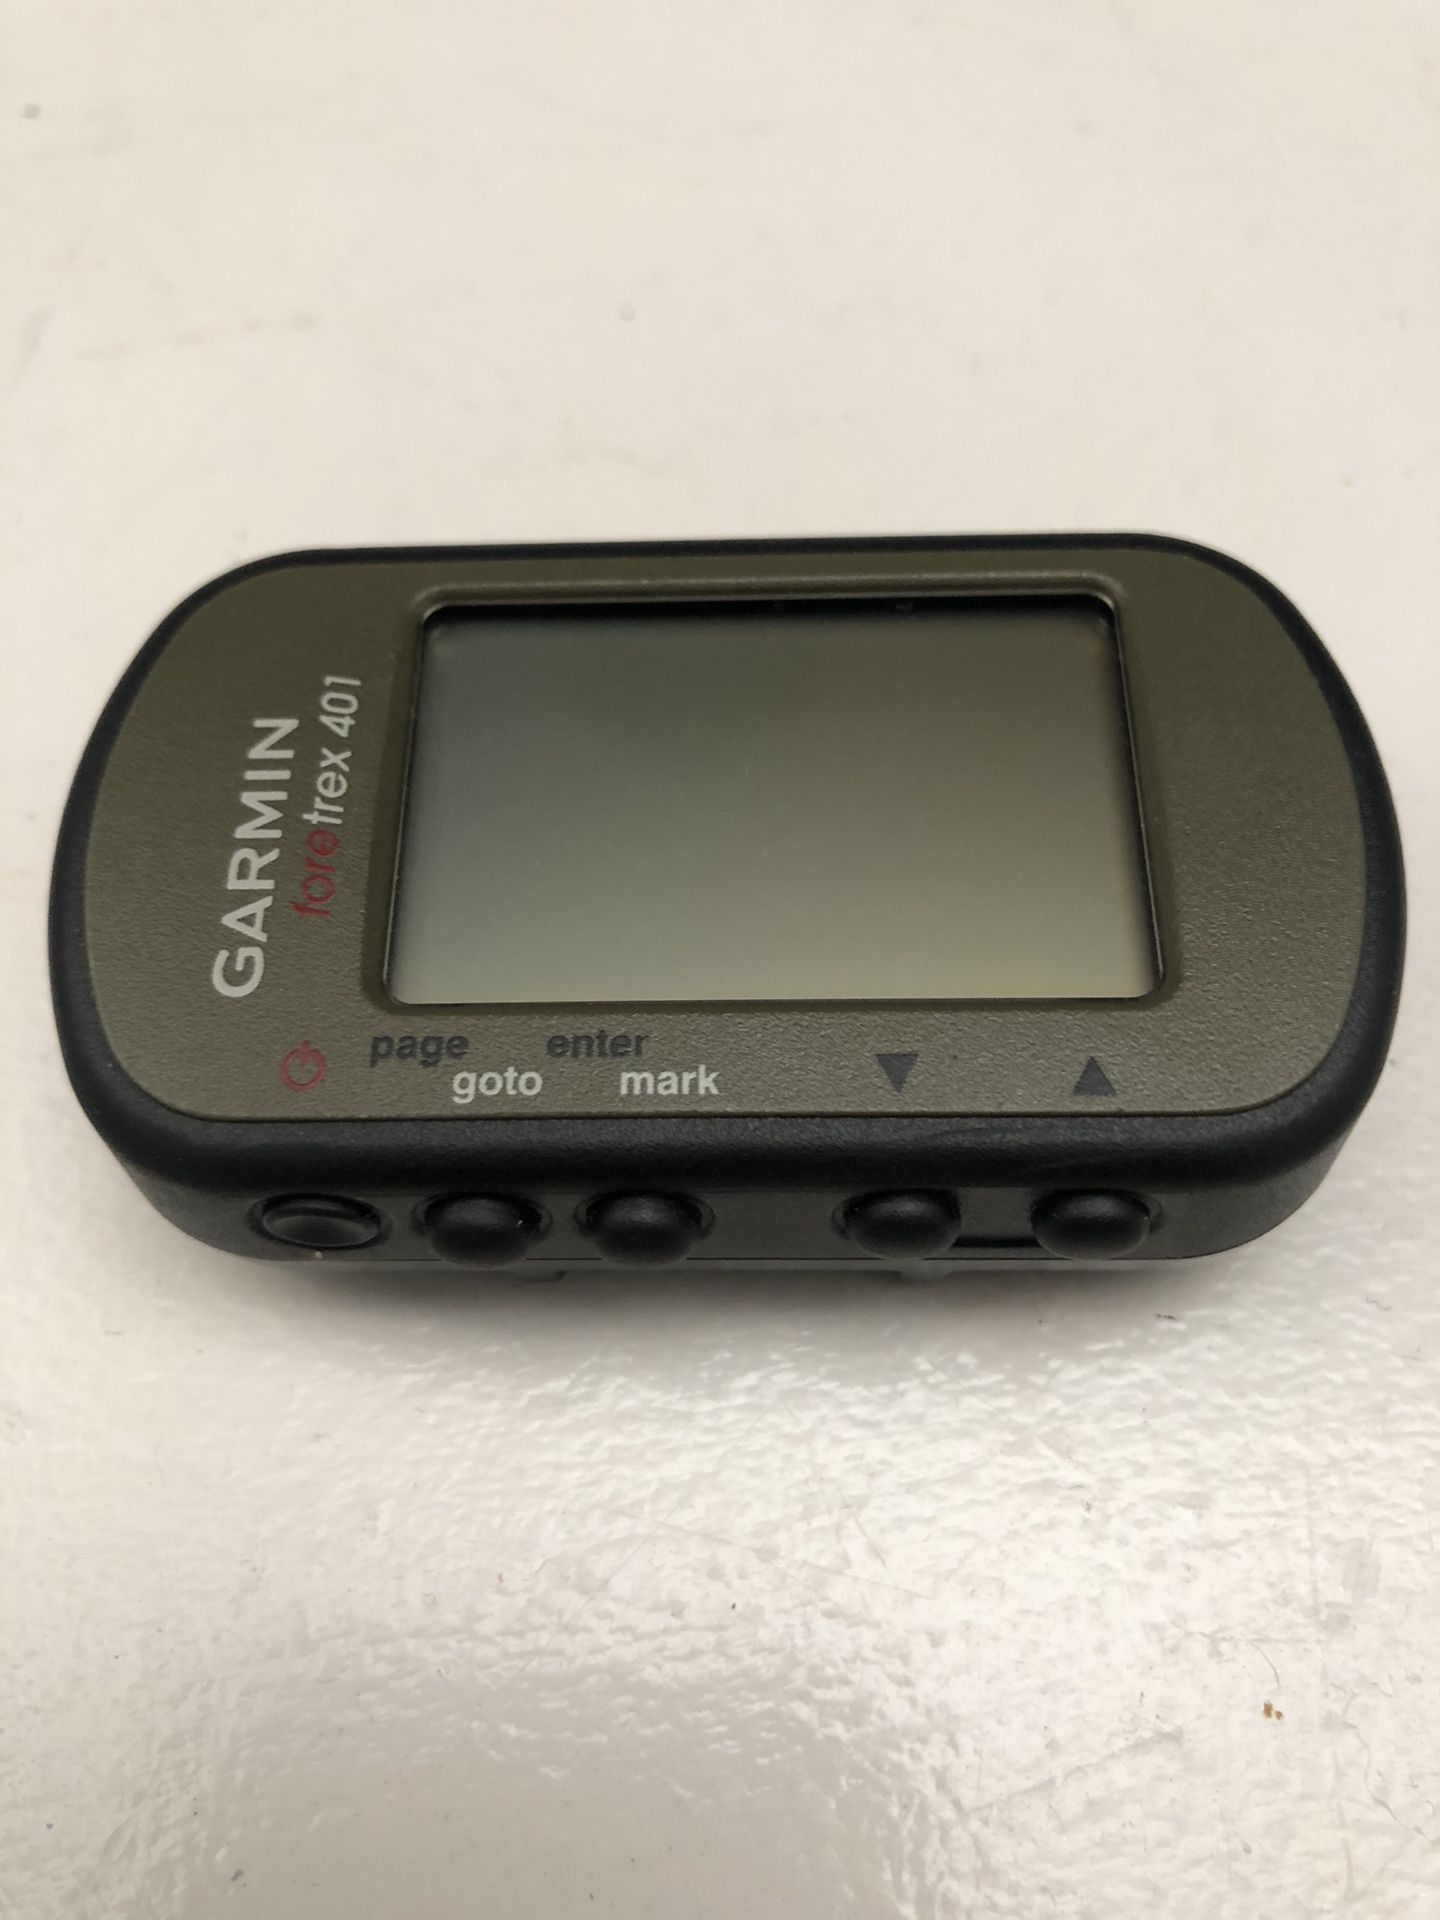 Garmin Foretrex 401 (Accepting Offers) Sale in National City, CA -